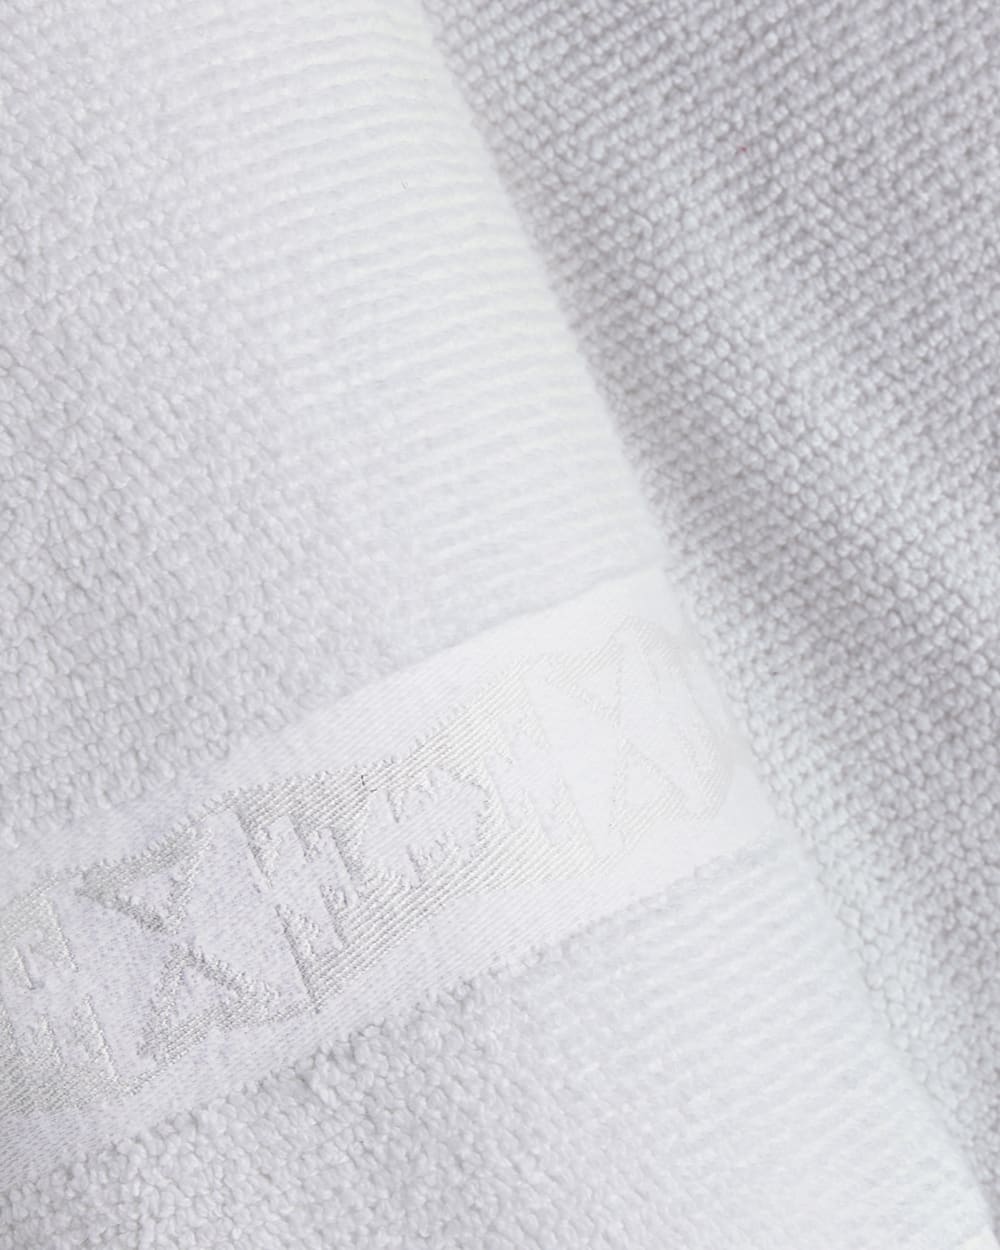 ALTERNATE VIEW OF LOS LUNAS TONAL TOWEL COLLECTION IN BRIGHT WHITE image number 5